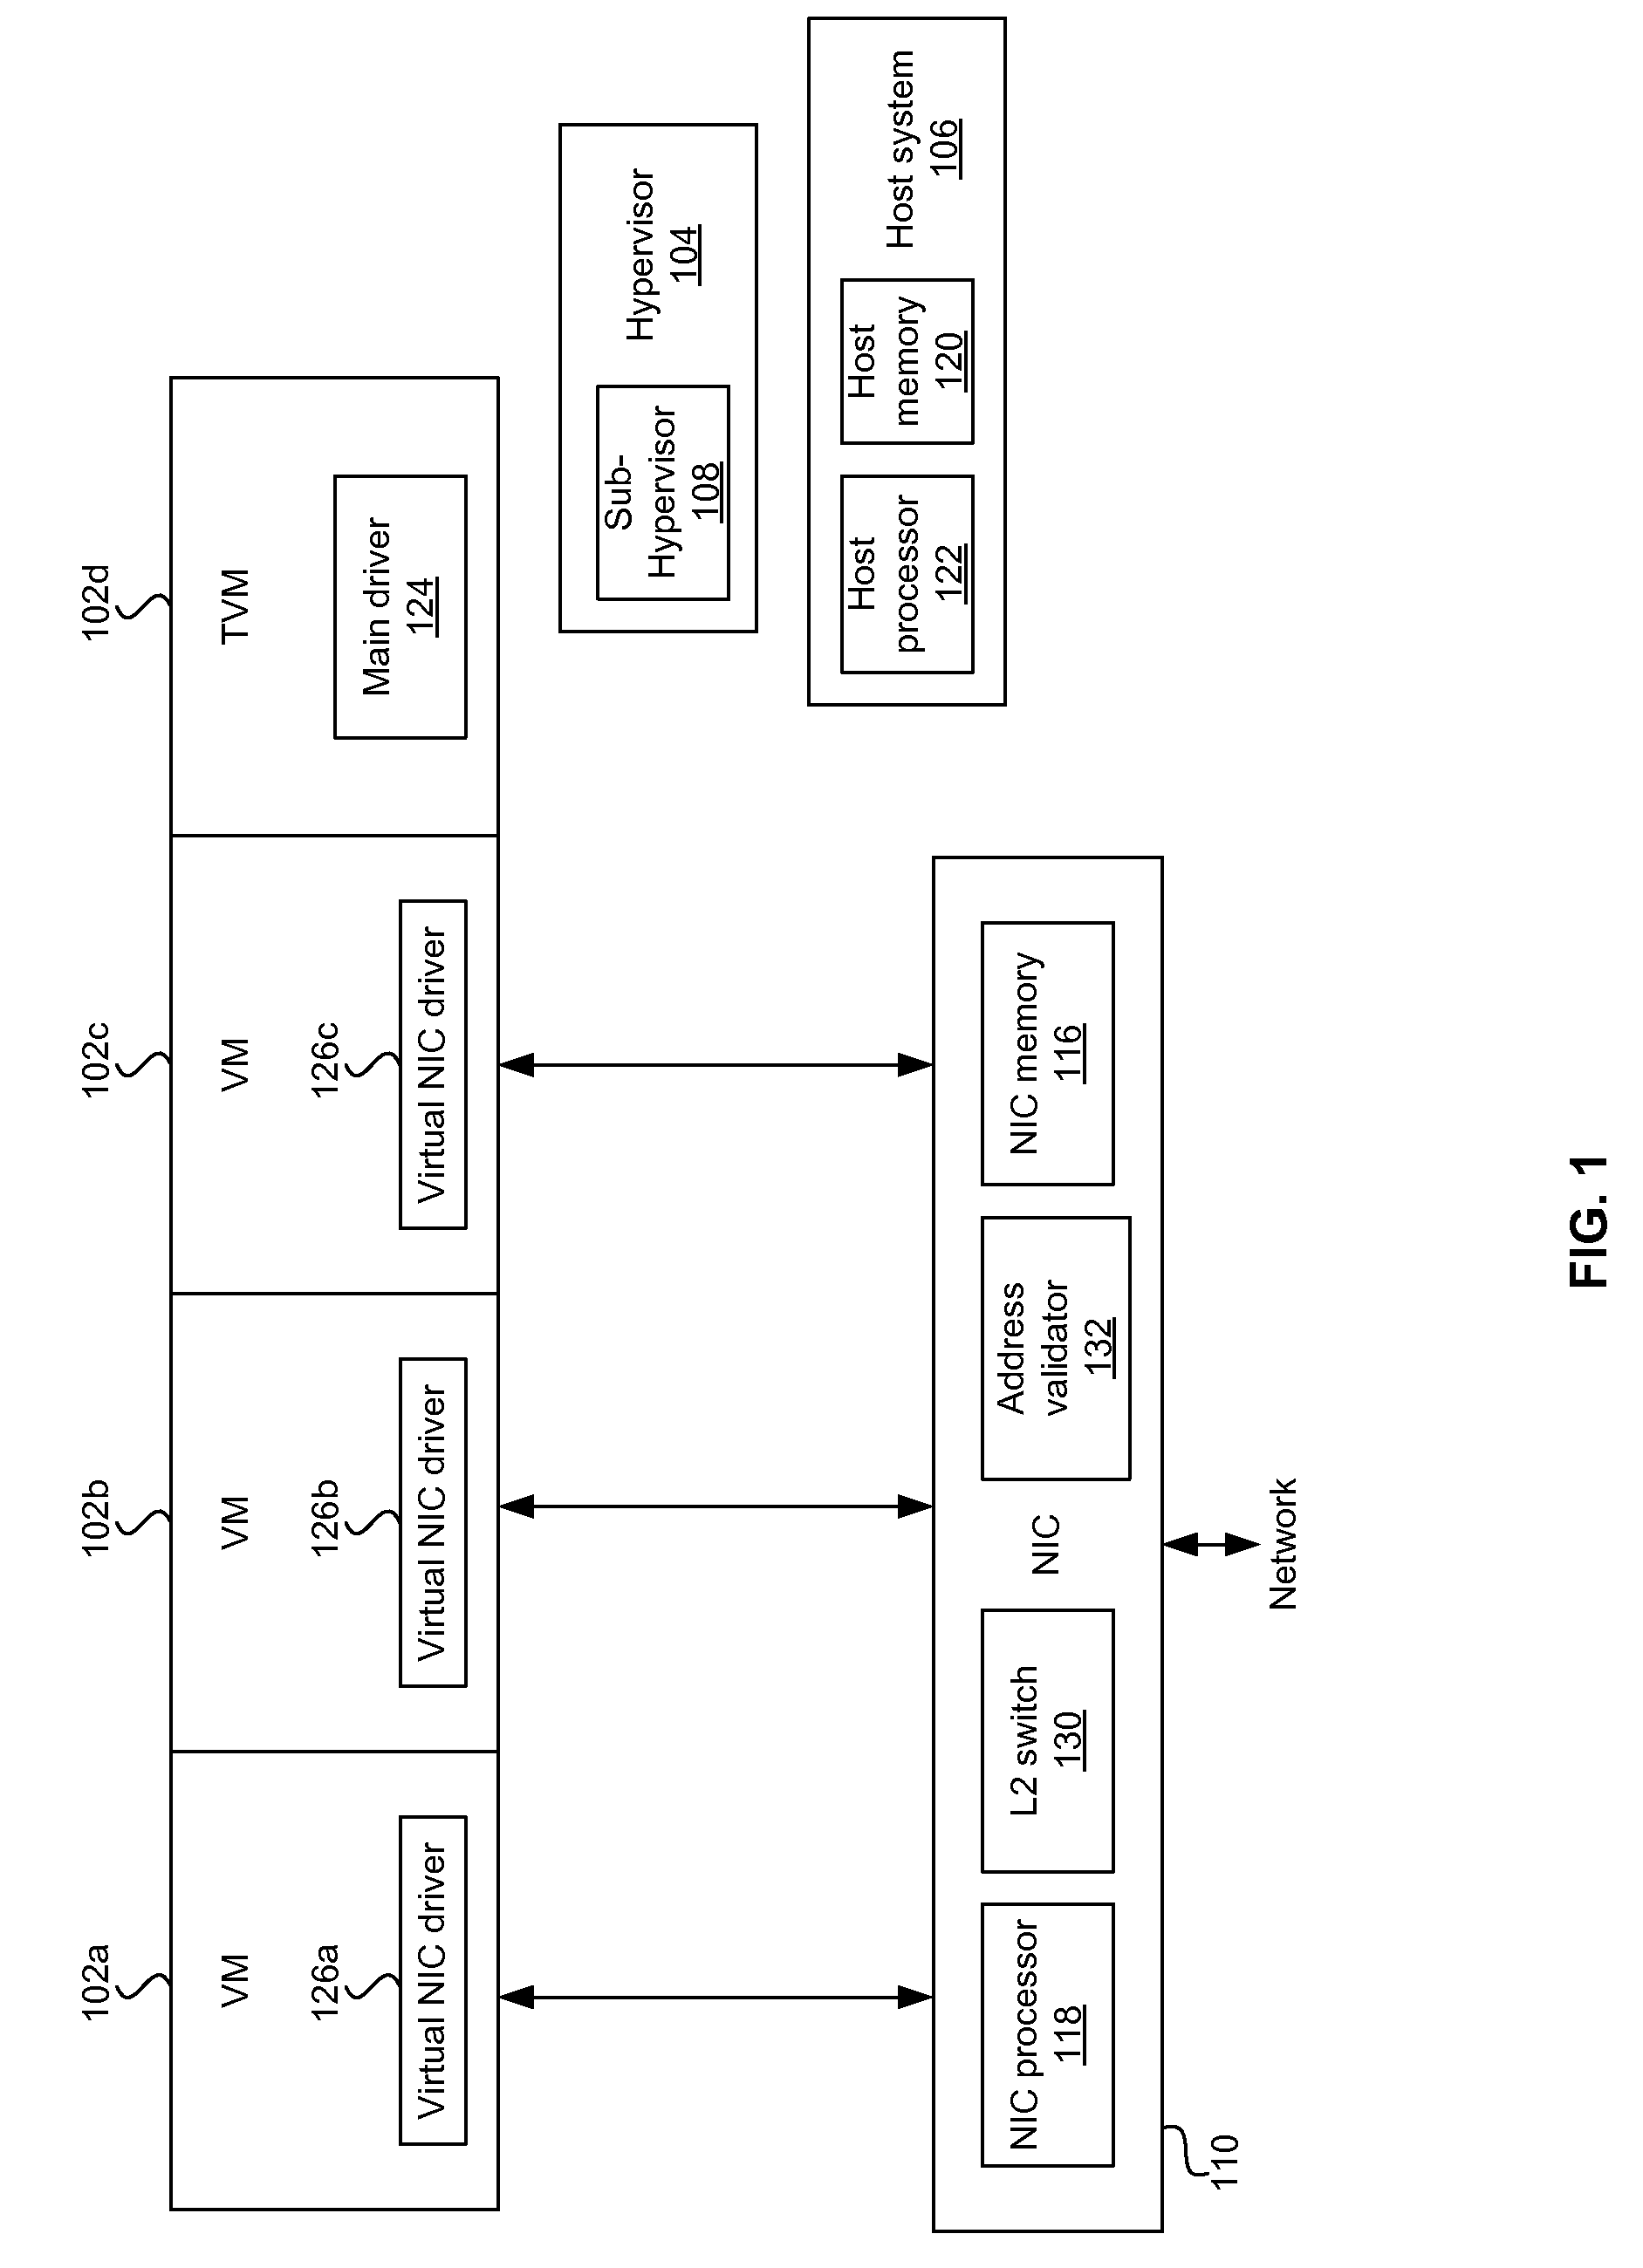 Method and system for fault tolerance and resilience for virtualized machines in a network